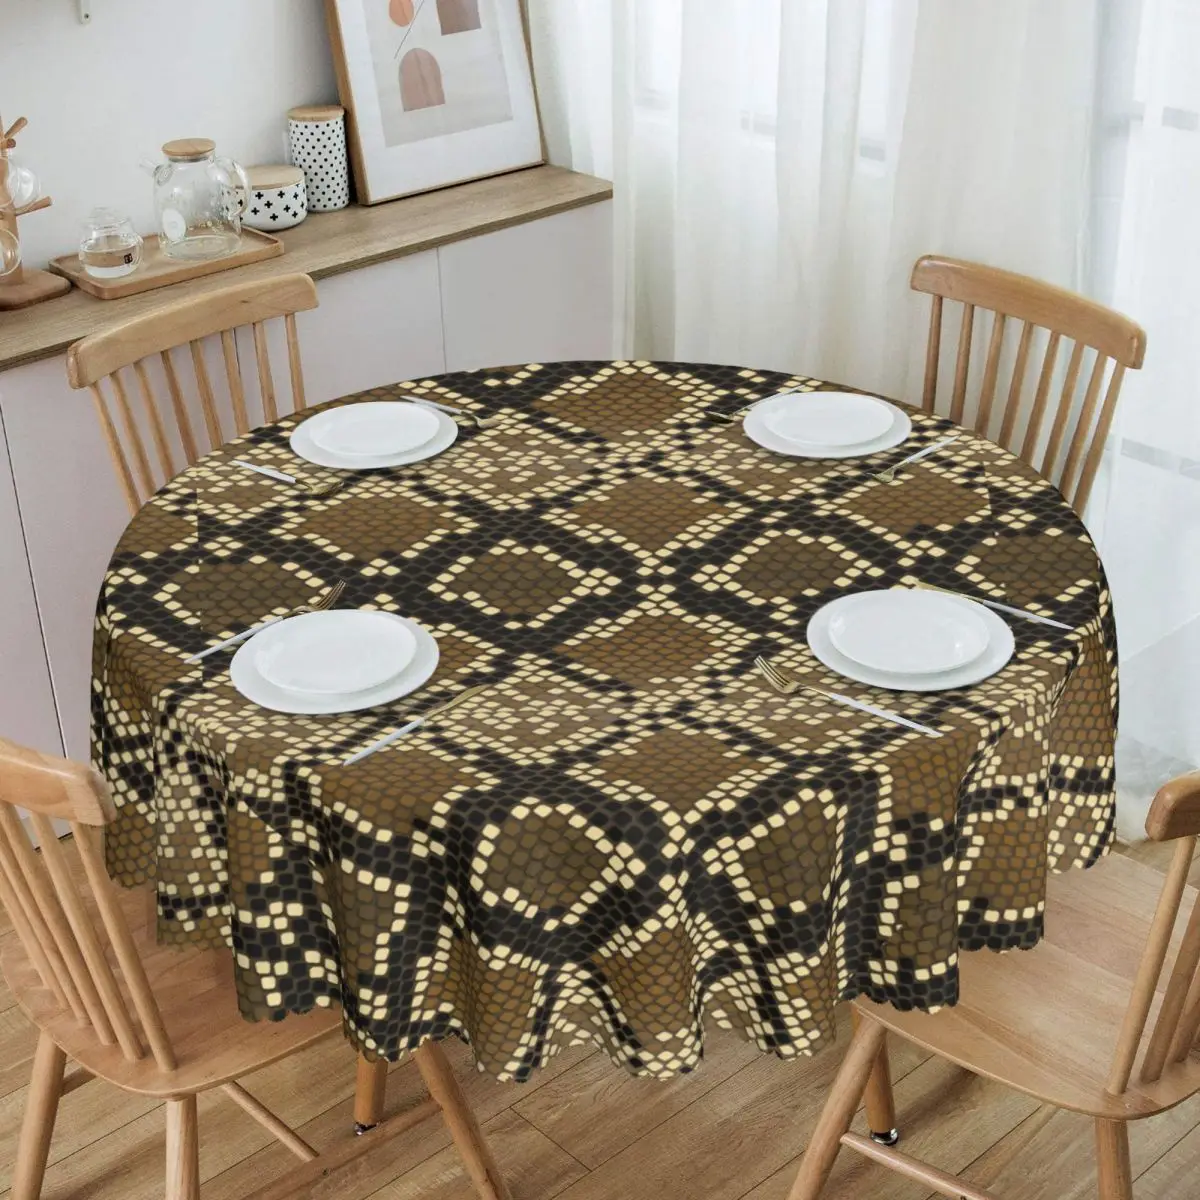 

Round Snake Skin Print Tablecloth Waterproof Oil-Proof Table Covers 60 inch Snakeskin Texture Table Cloth